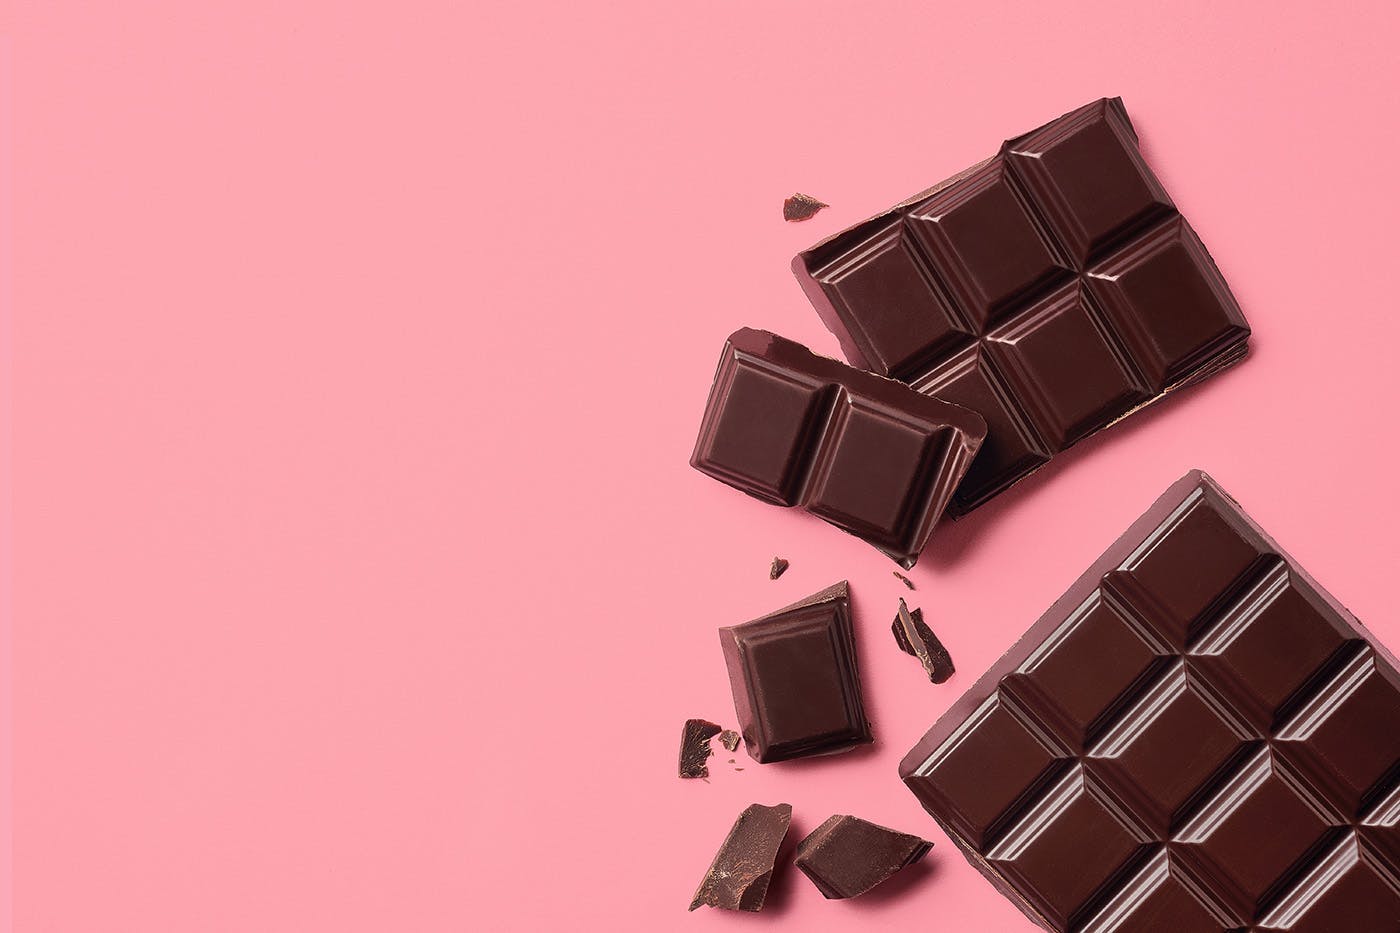 Two delta 8 chocolate edibles on pink background